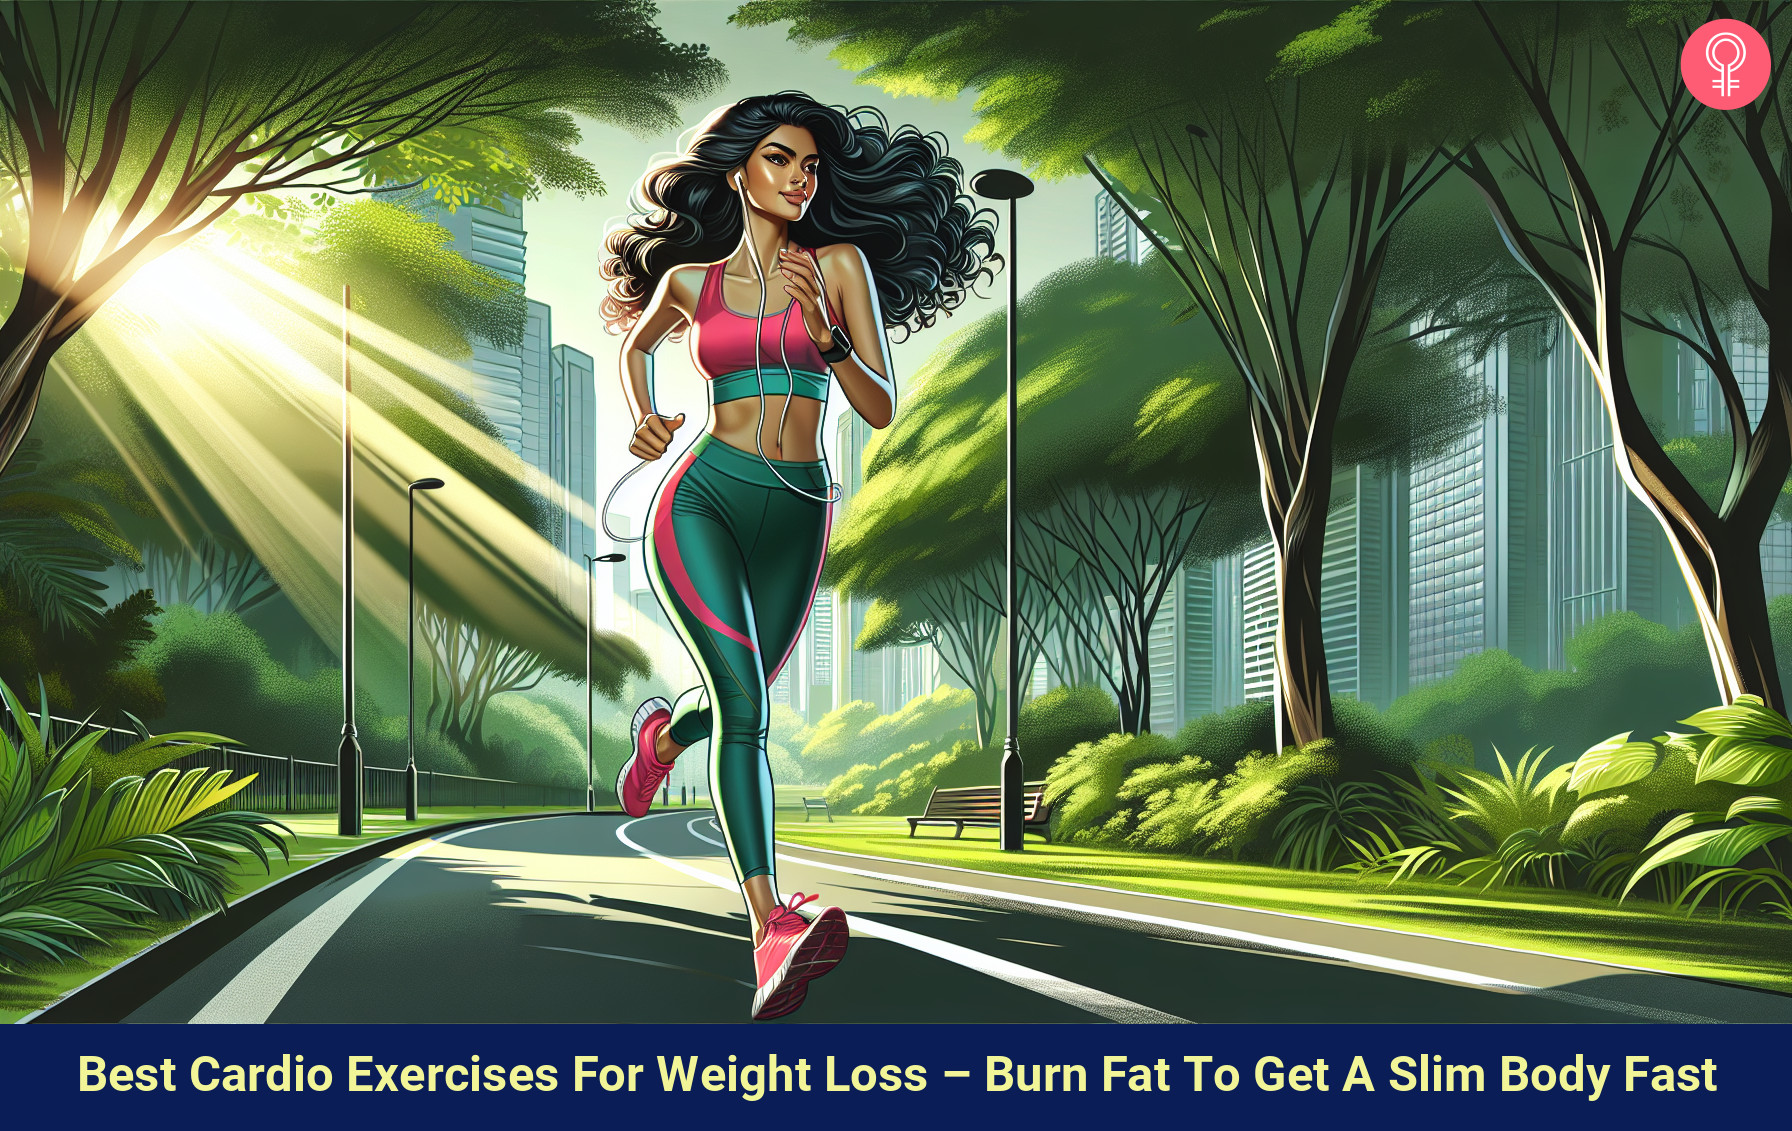 10 Best Cardio Exercises For Weight Loss – Burn Fat To Get A Slim